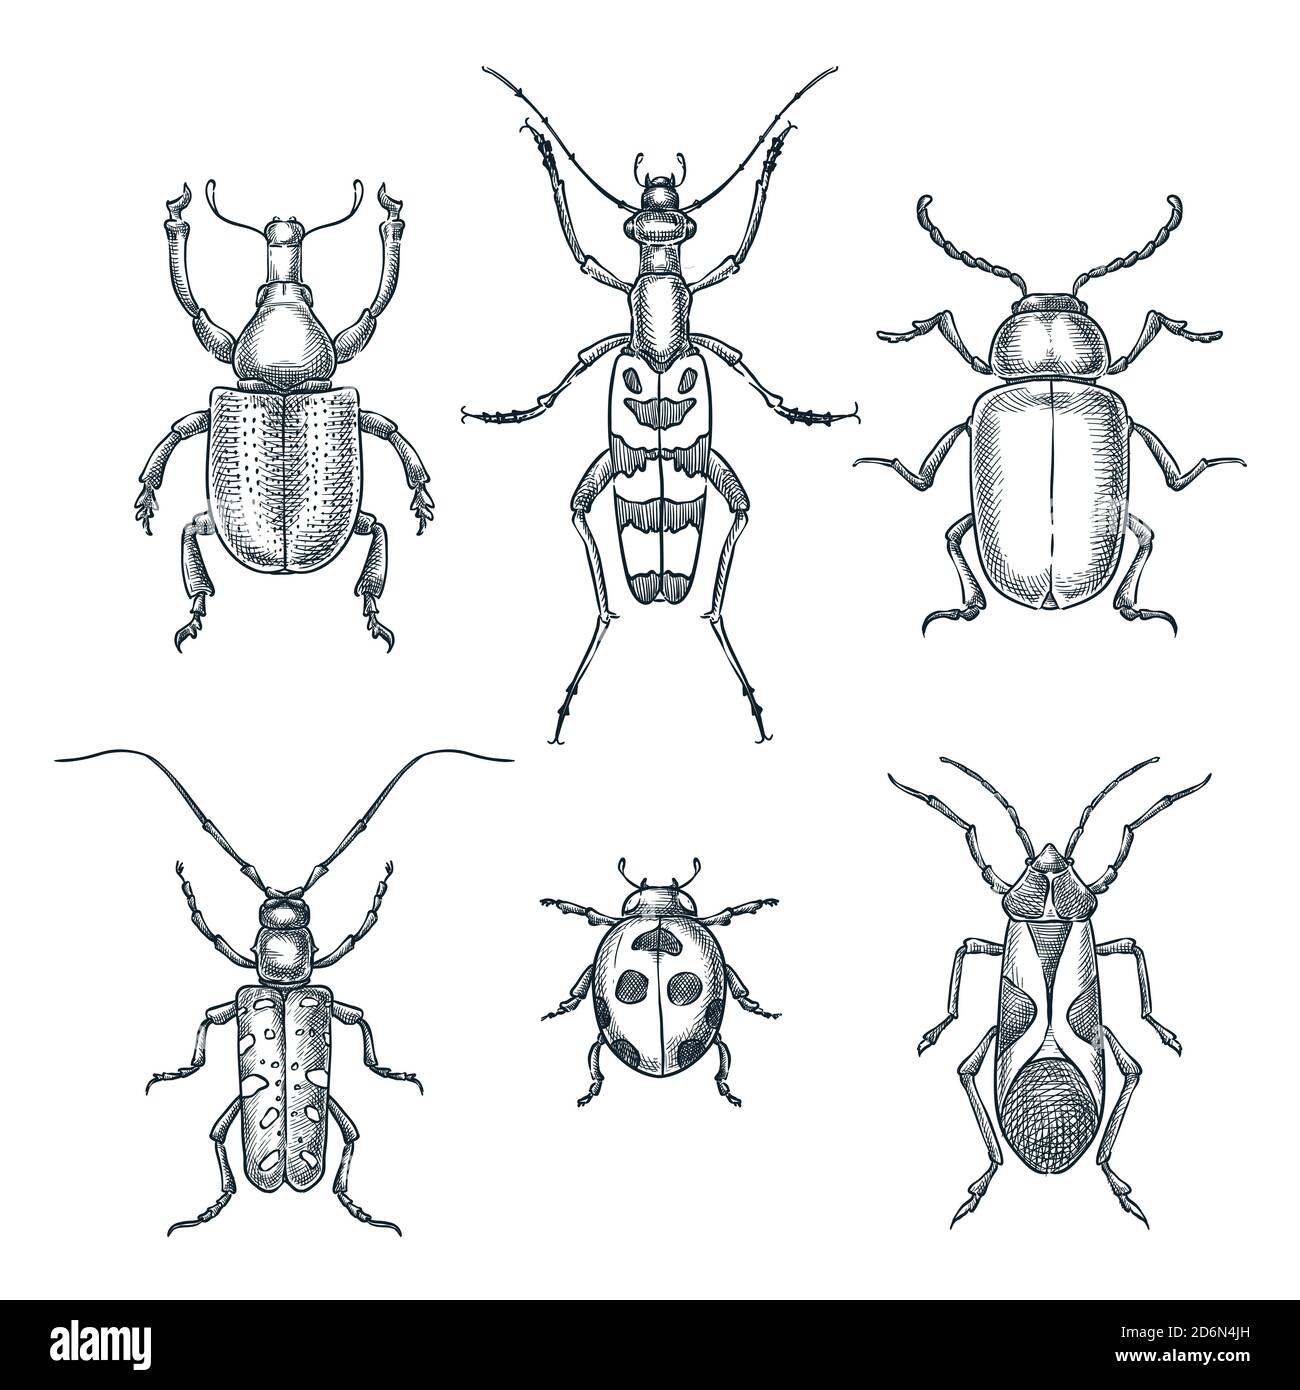 Beetles and bugs vector sketch illustration. Set of doodle hand drawn insects isolated on white background. Stock Vector